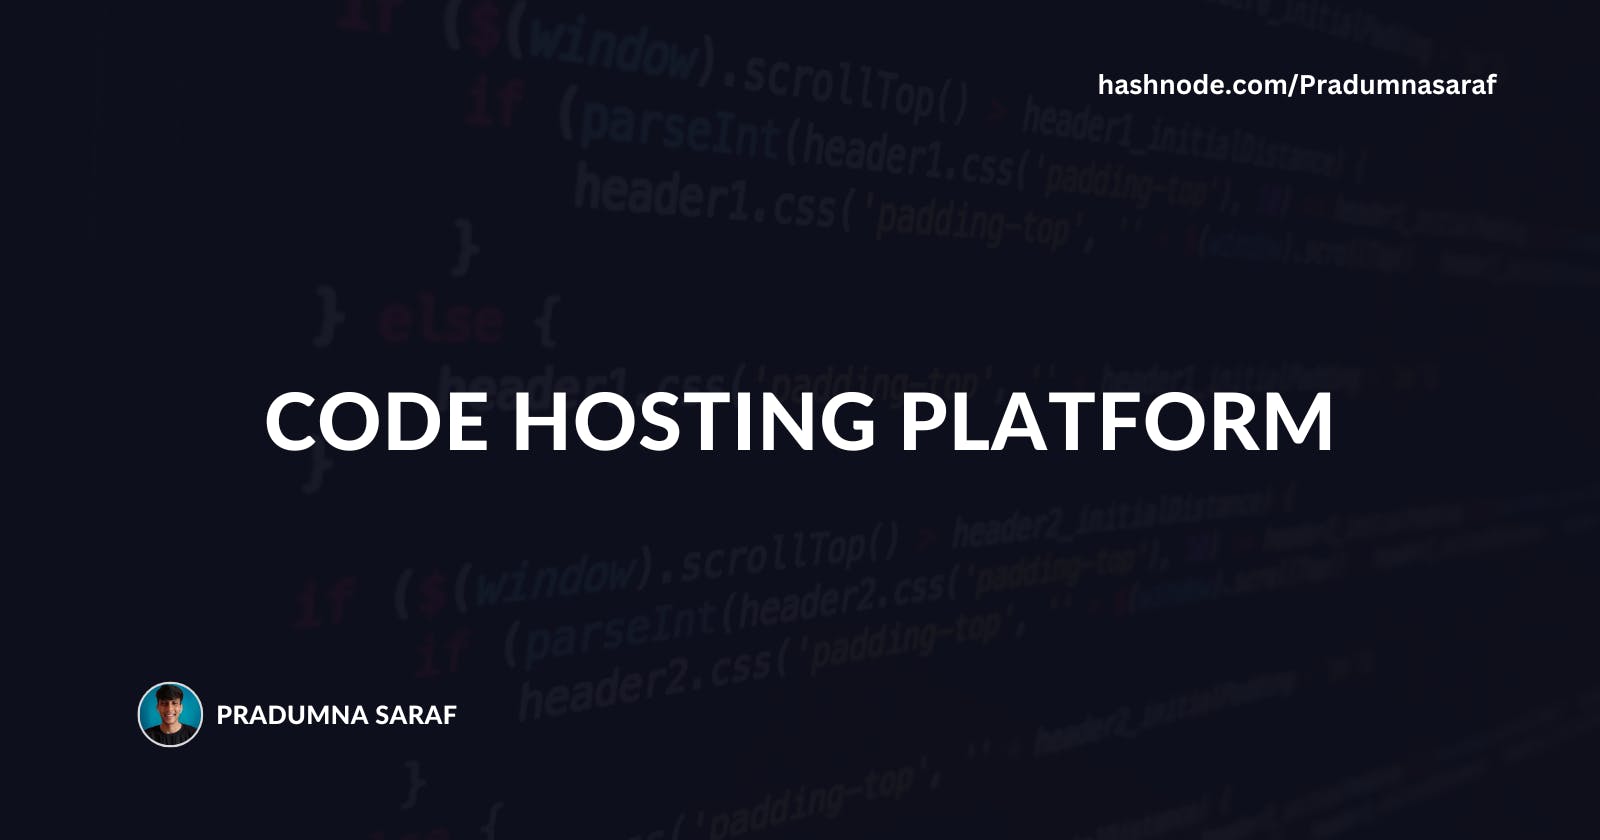 What is a code hosting platform?